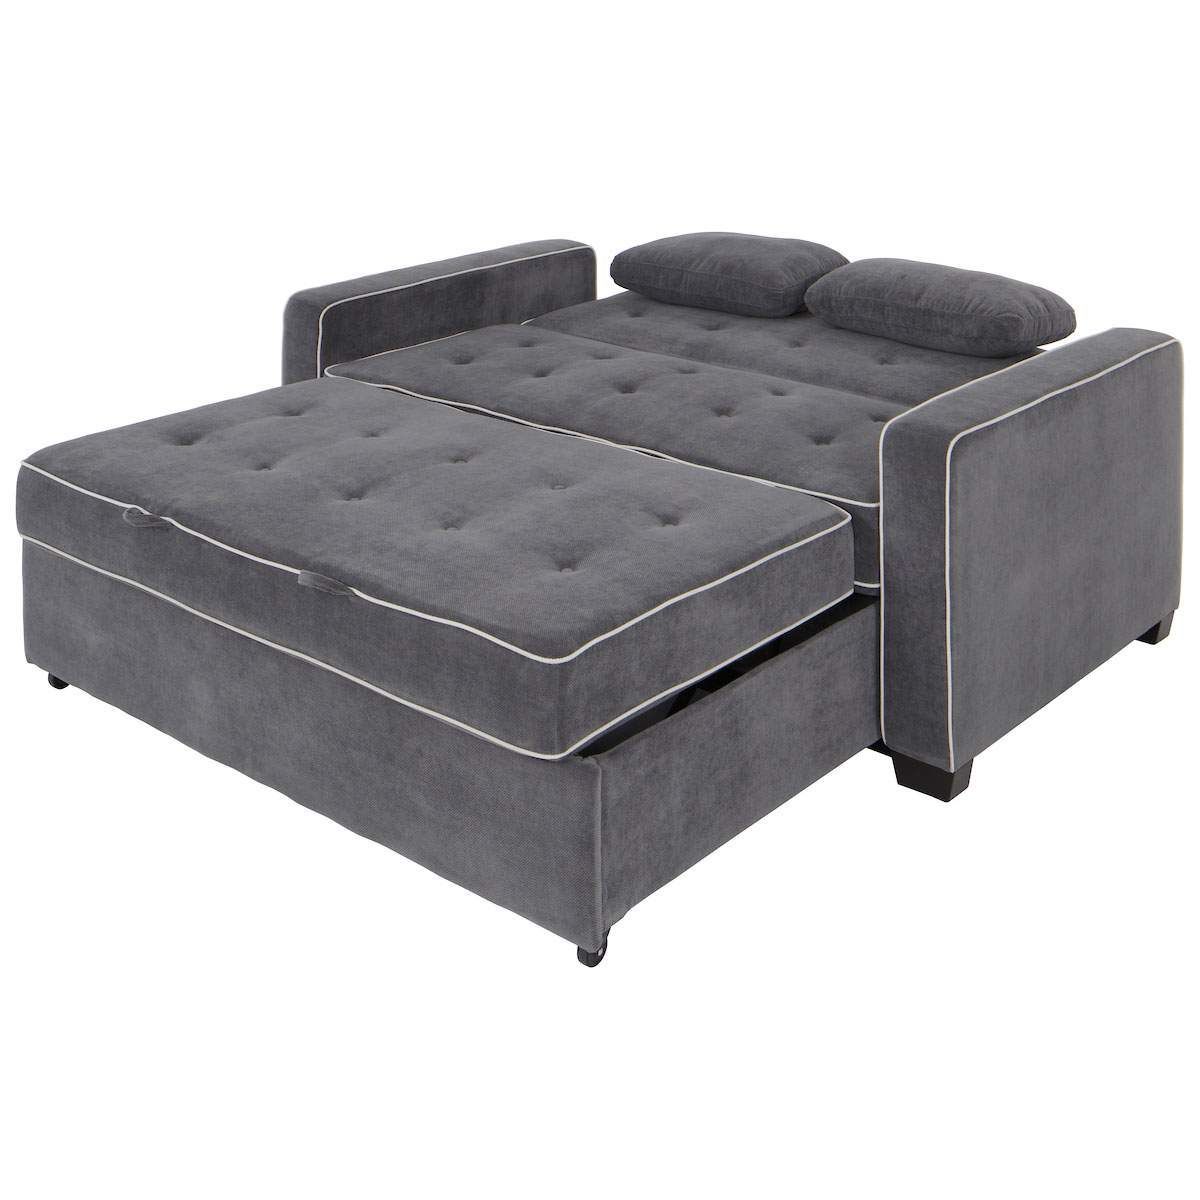 Supreme Pull Out Sofa Bed Fold Away Couch Within 2 In 1 Gray Pull Out Sofa Beds (Gallery 16 of 20)